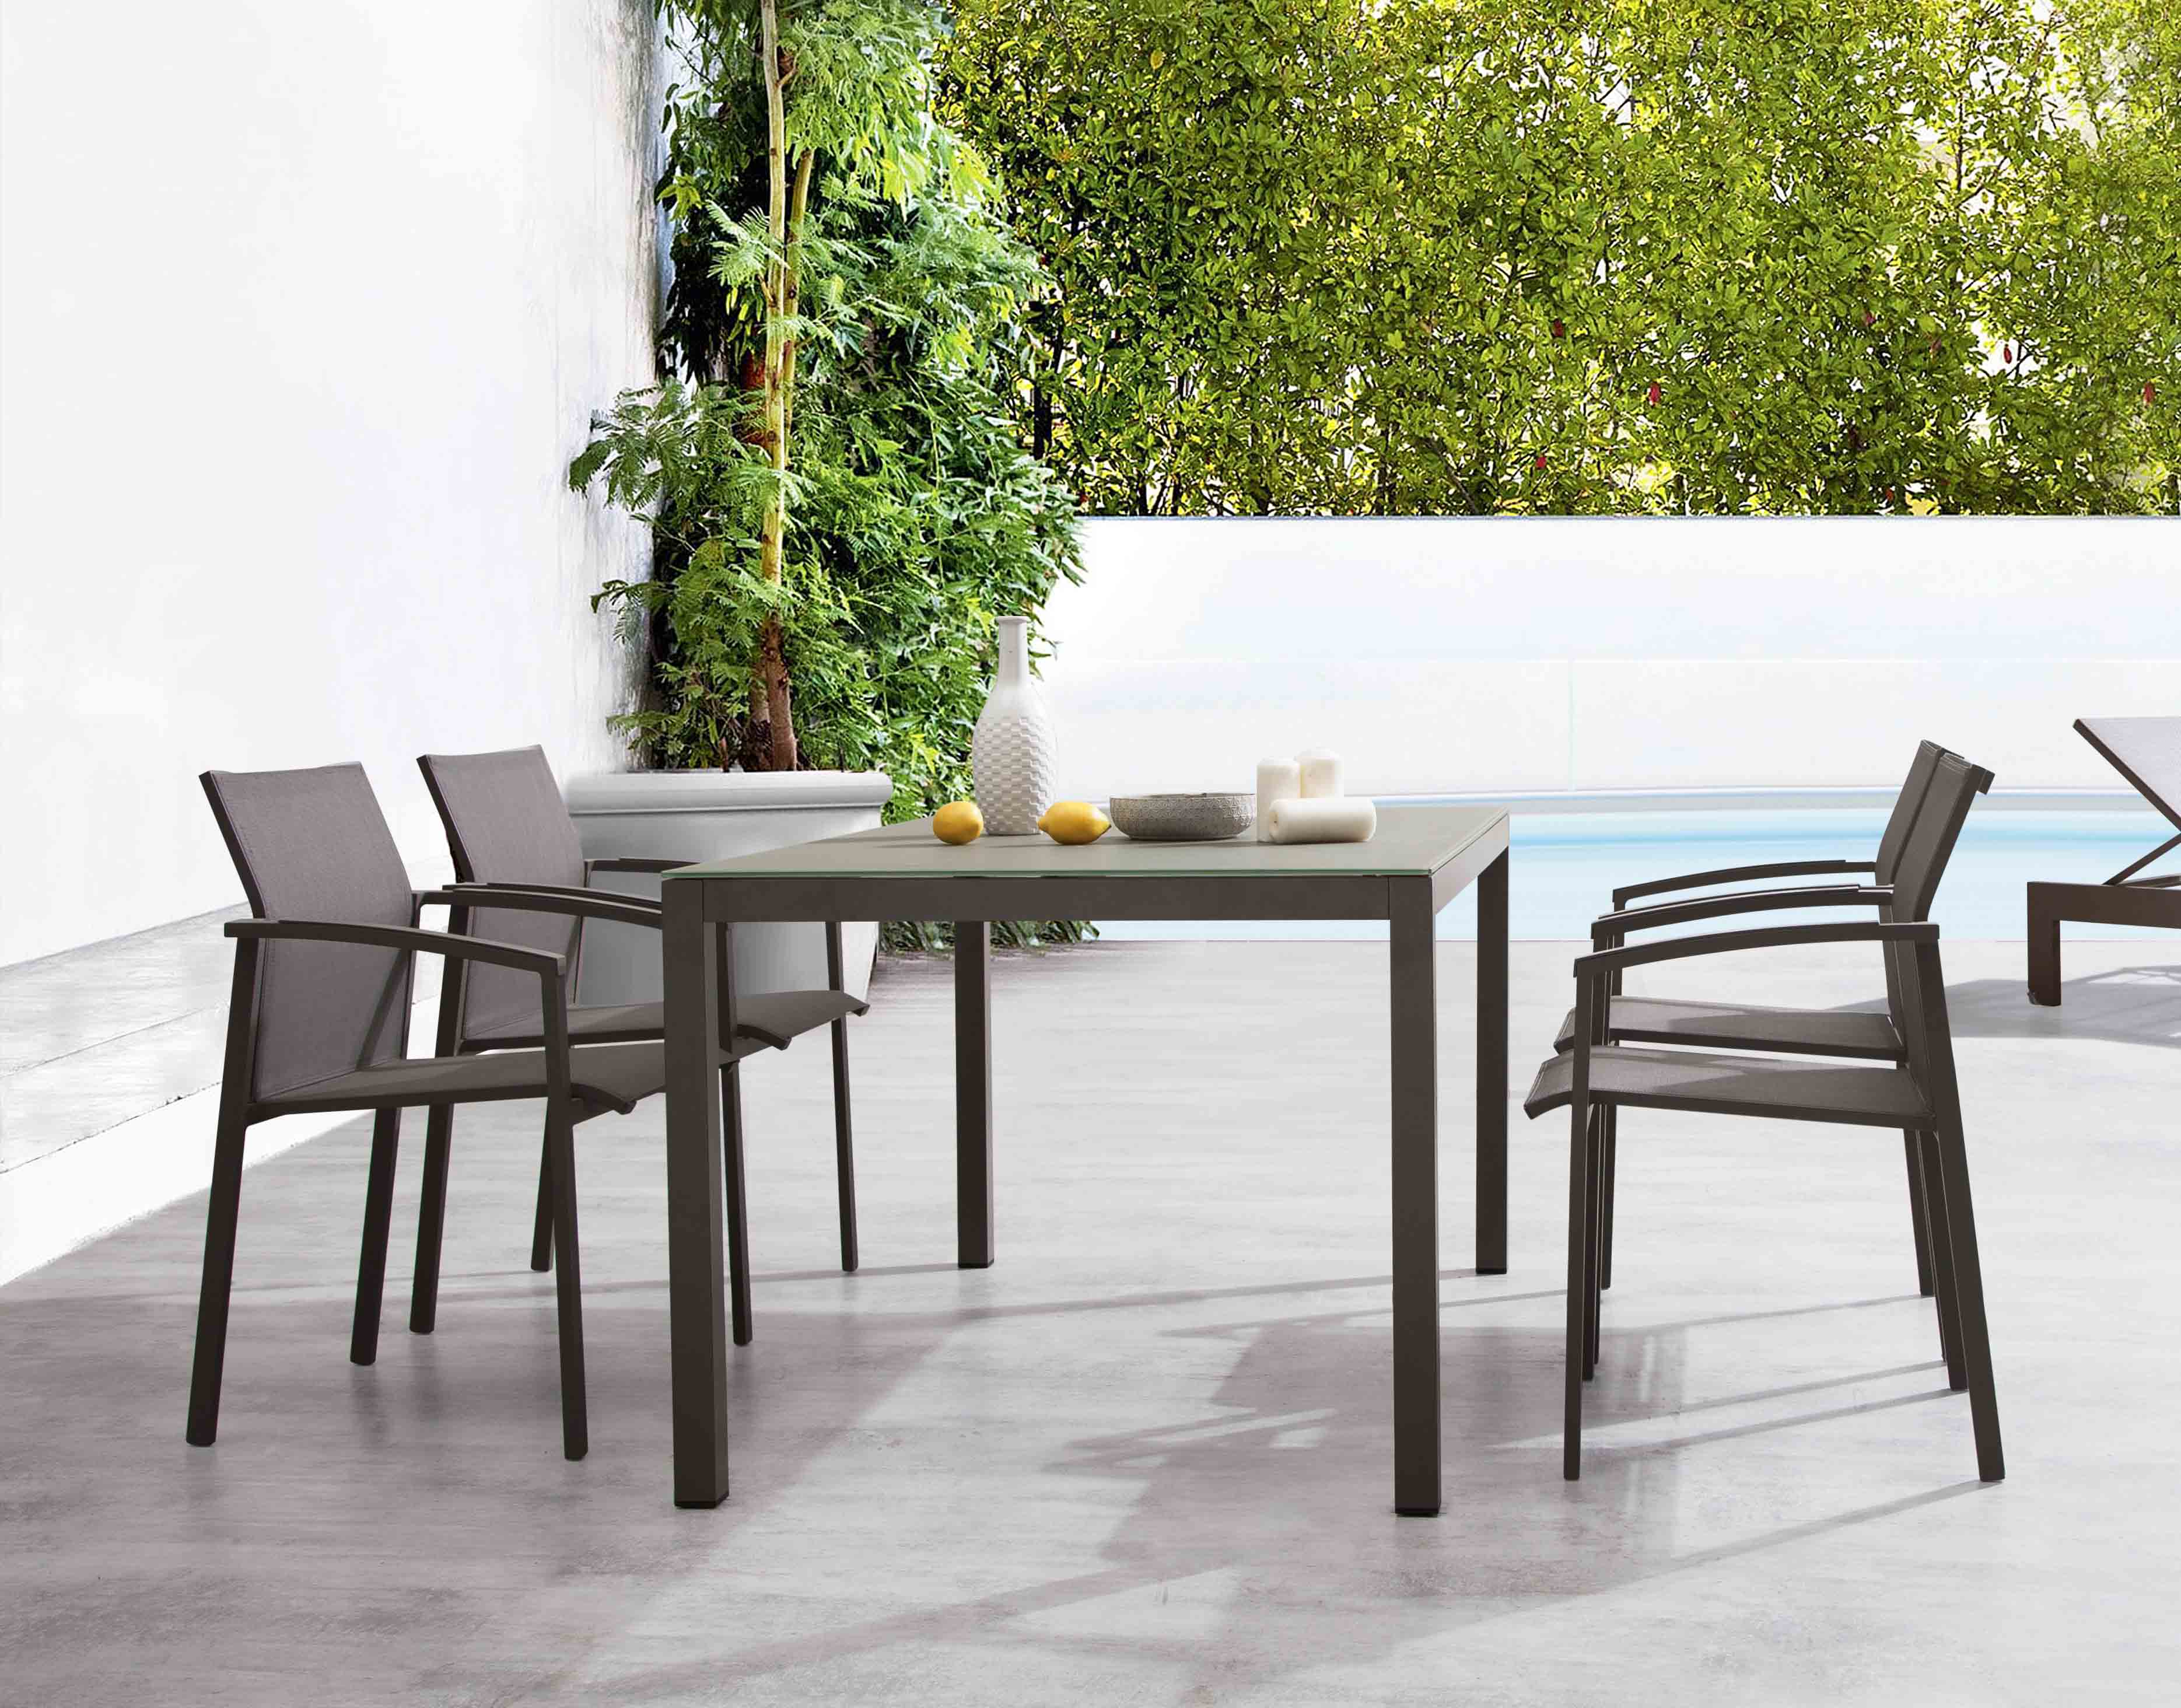 Ronda textile dining chair S3